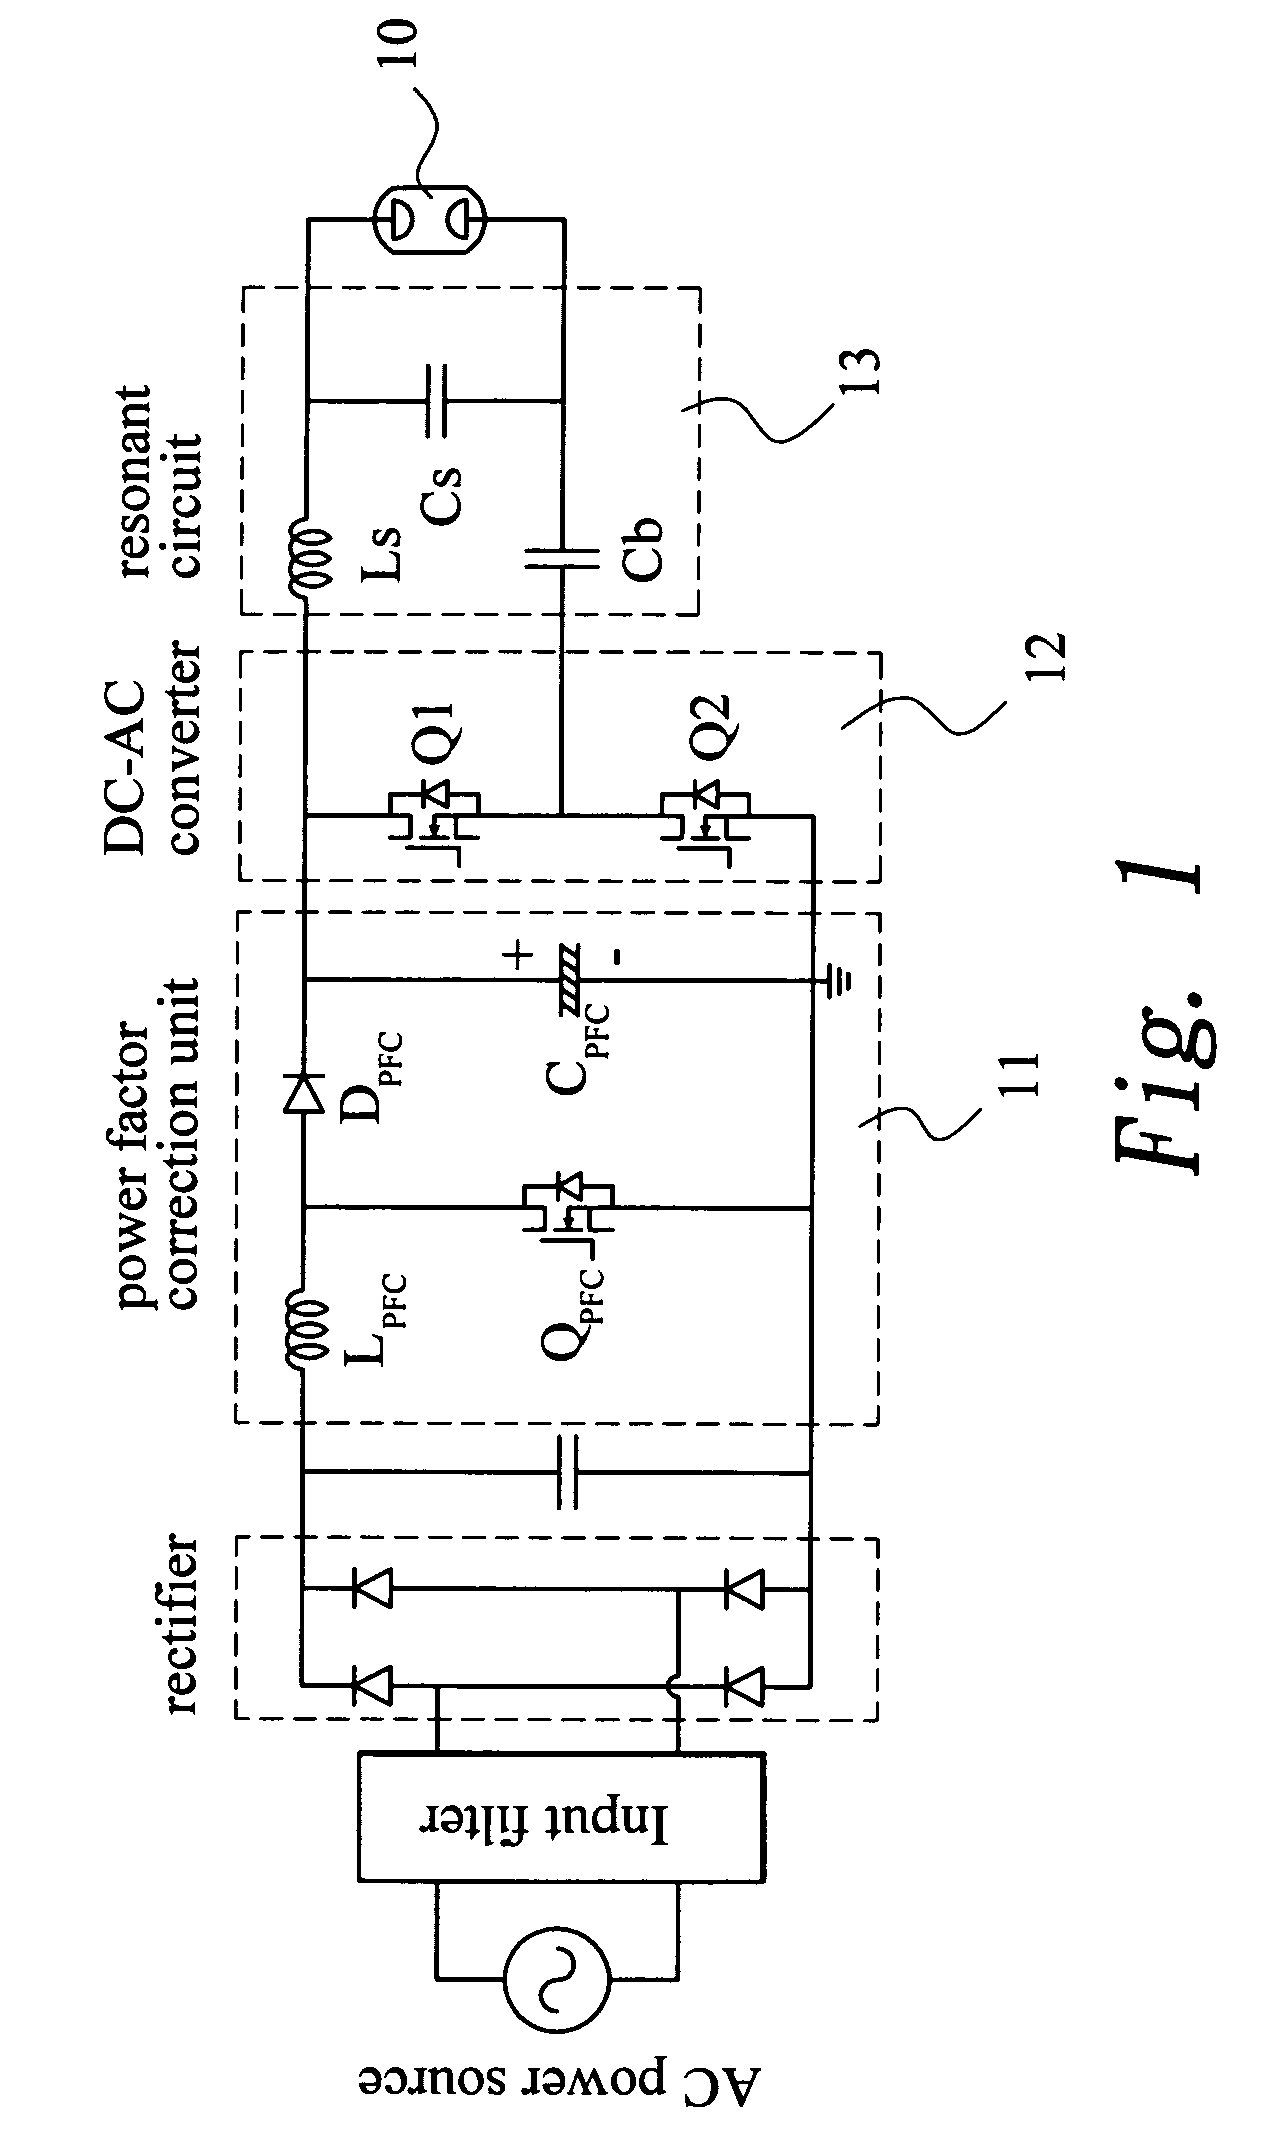 Single-stage electronic ballast device